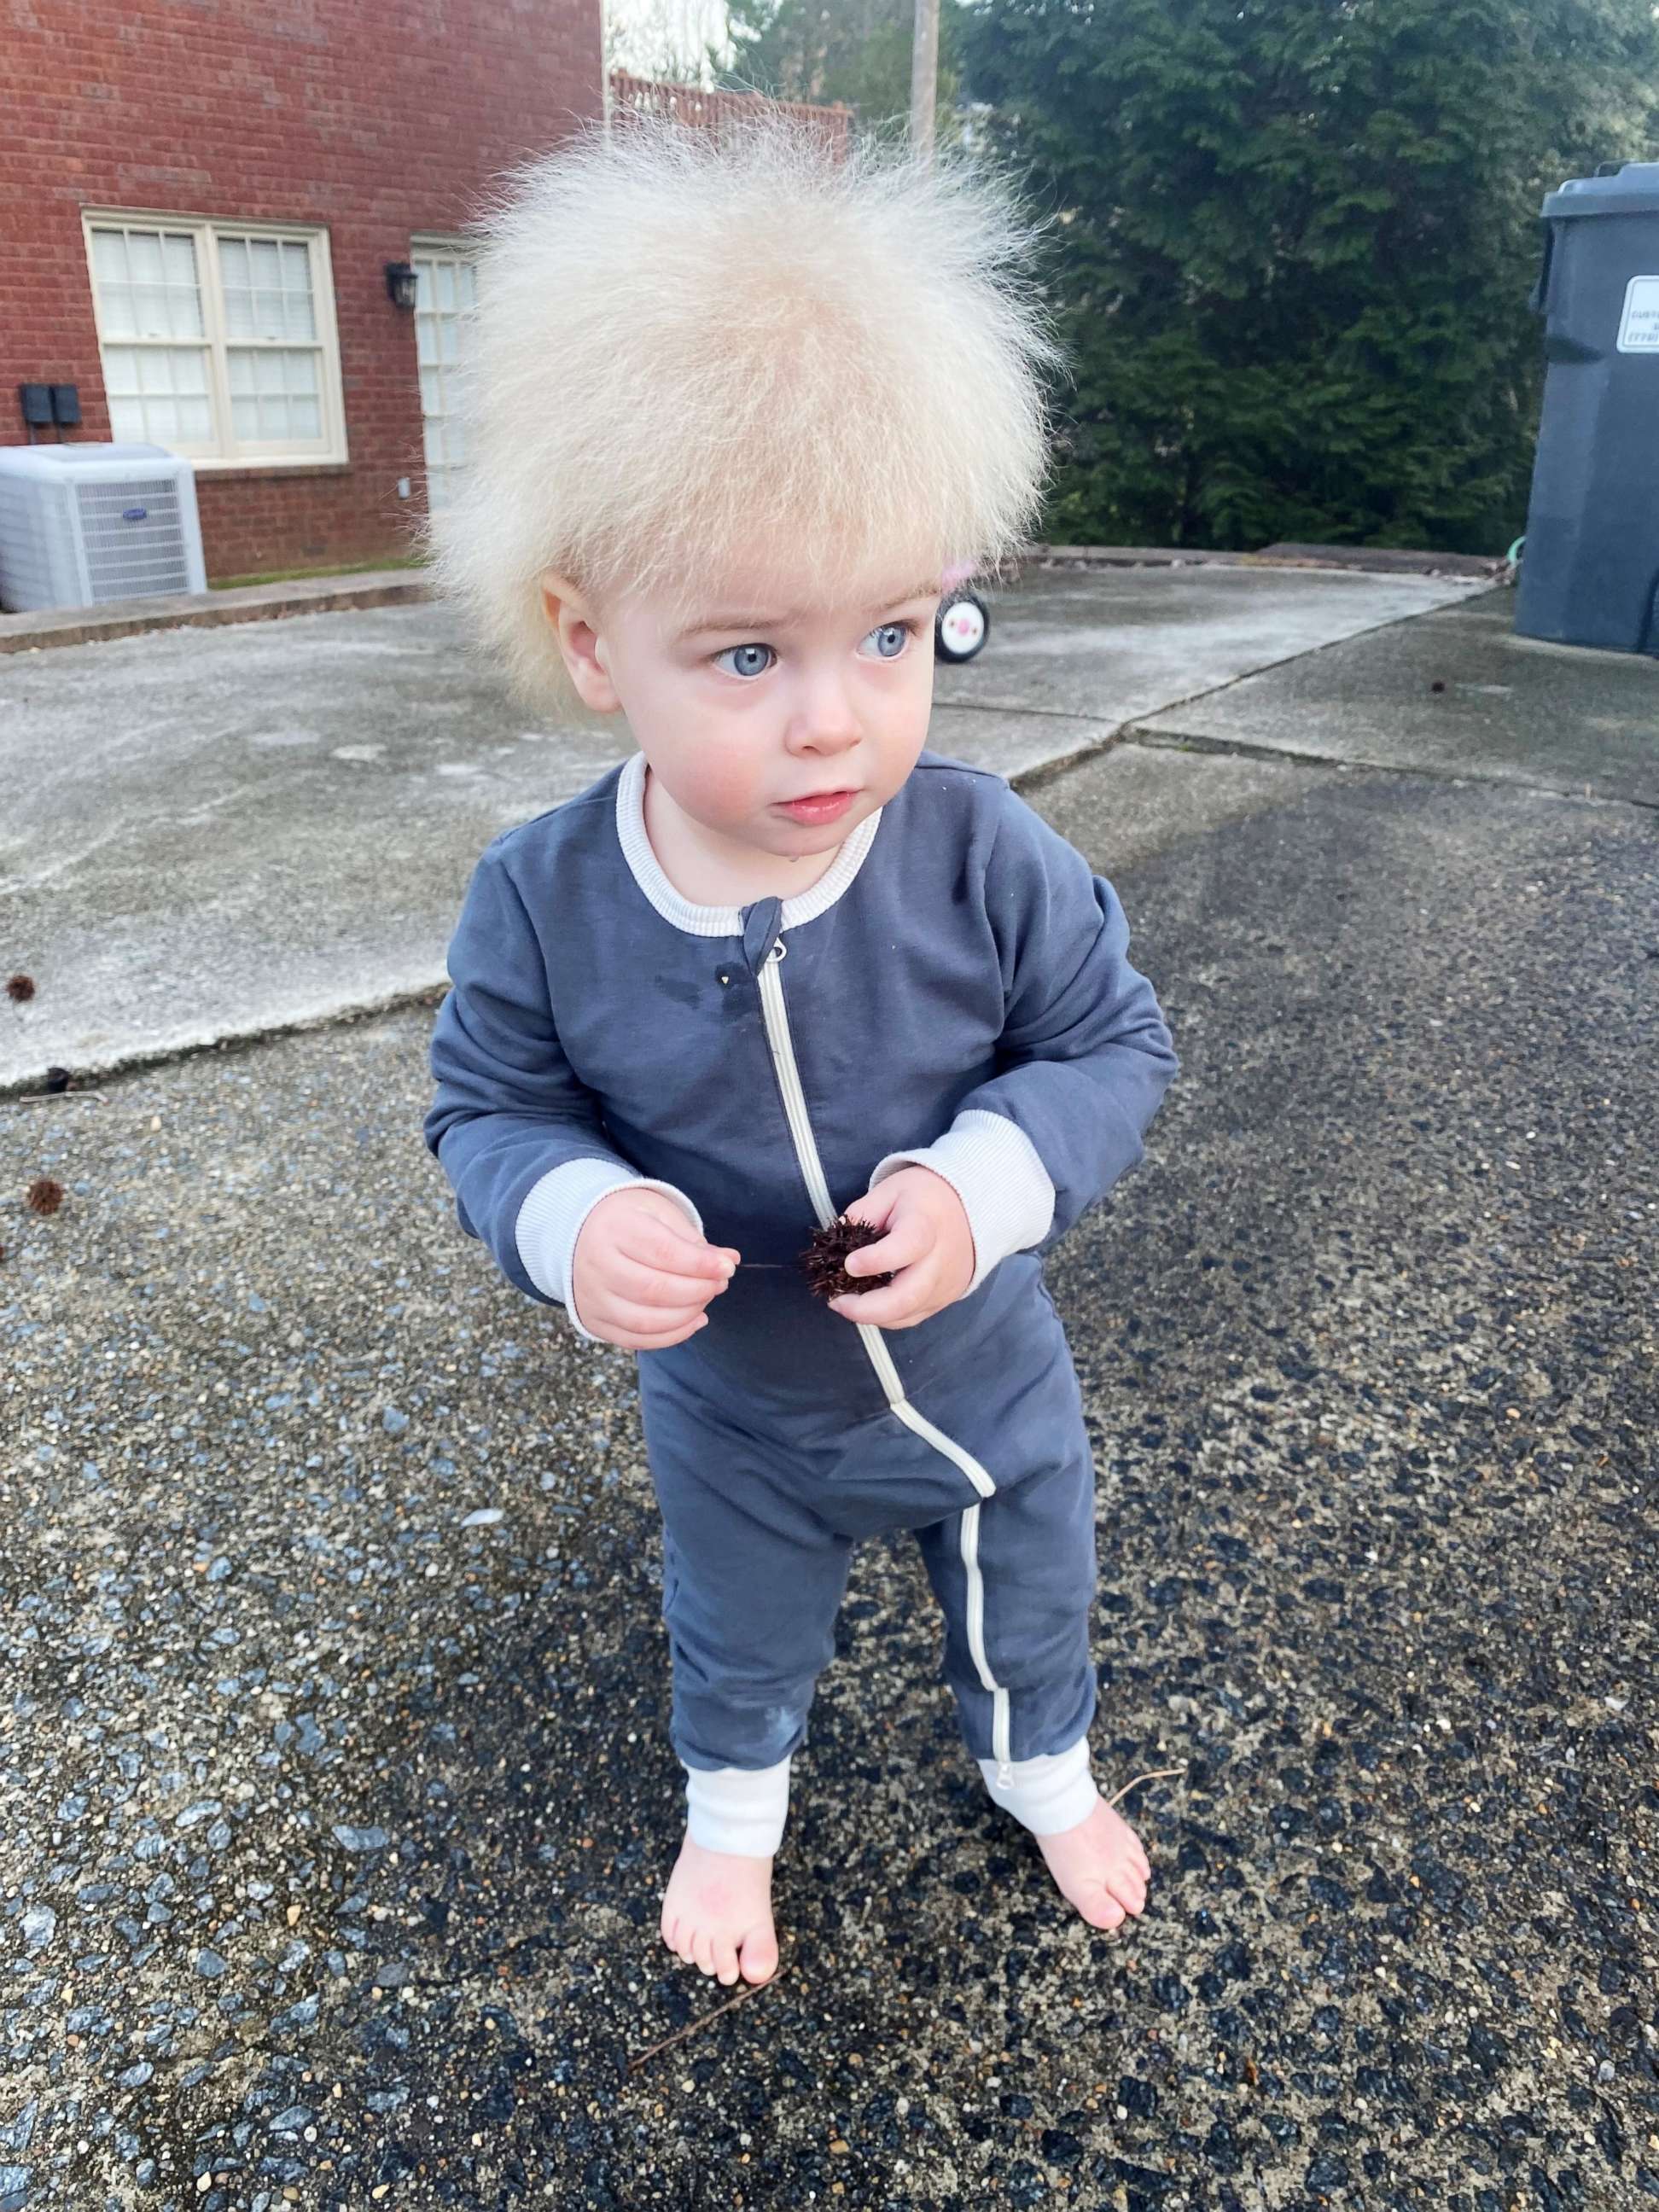 PHOTO: 1 year old Locklan Samples, who has a rare disorder called uncombable hair syndrome, is pictured in a family photo near Atlanta, Feb. 23, 2022.